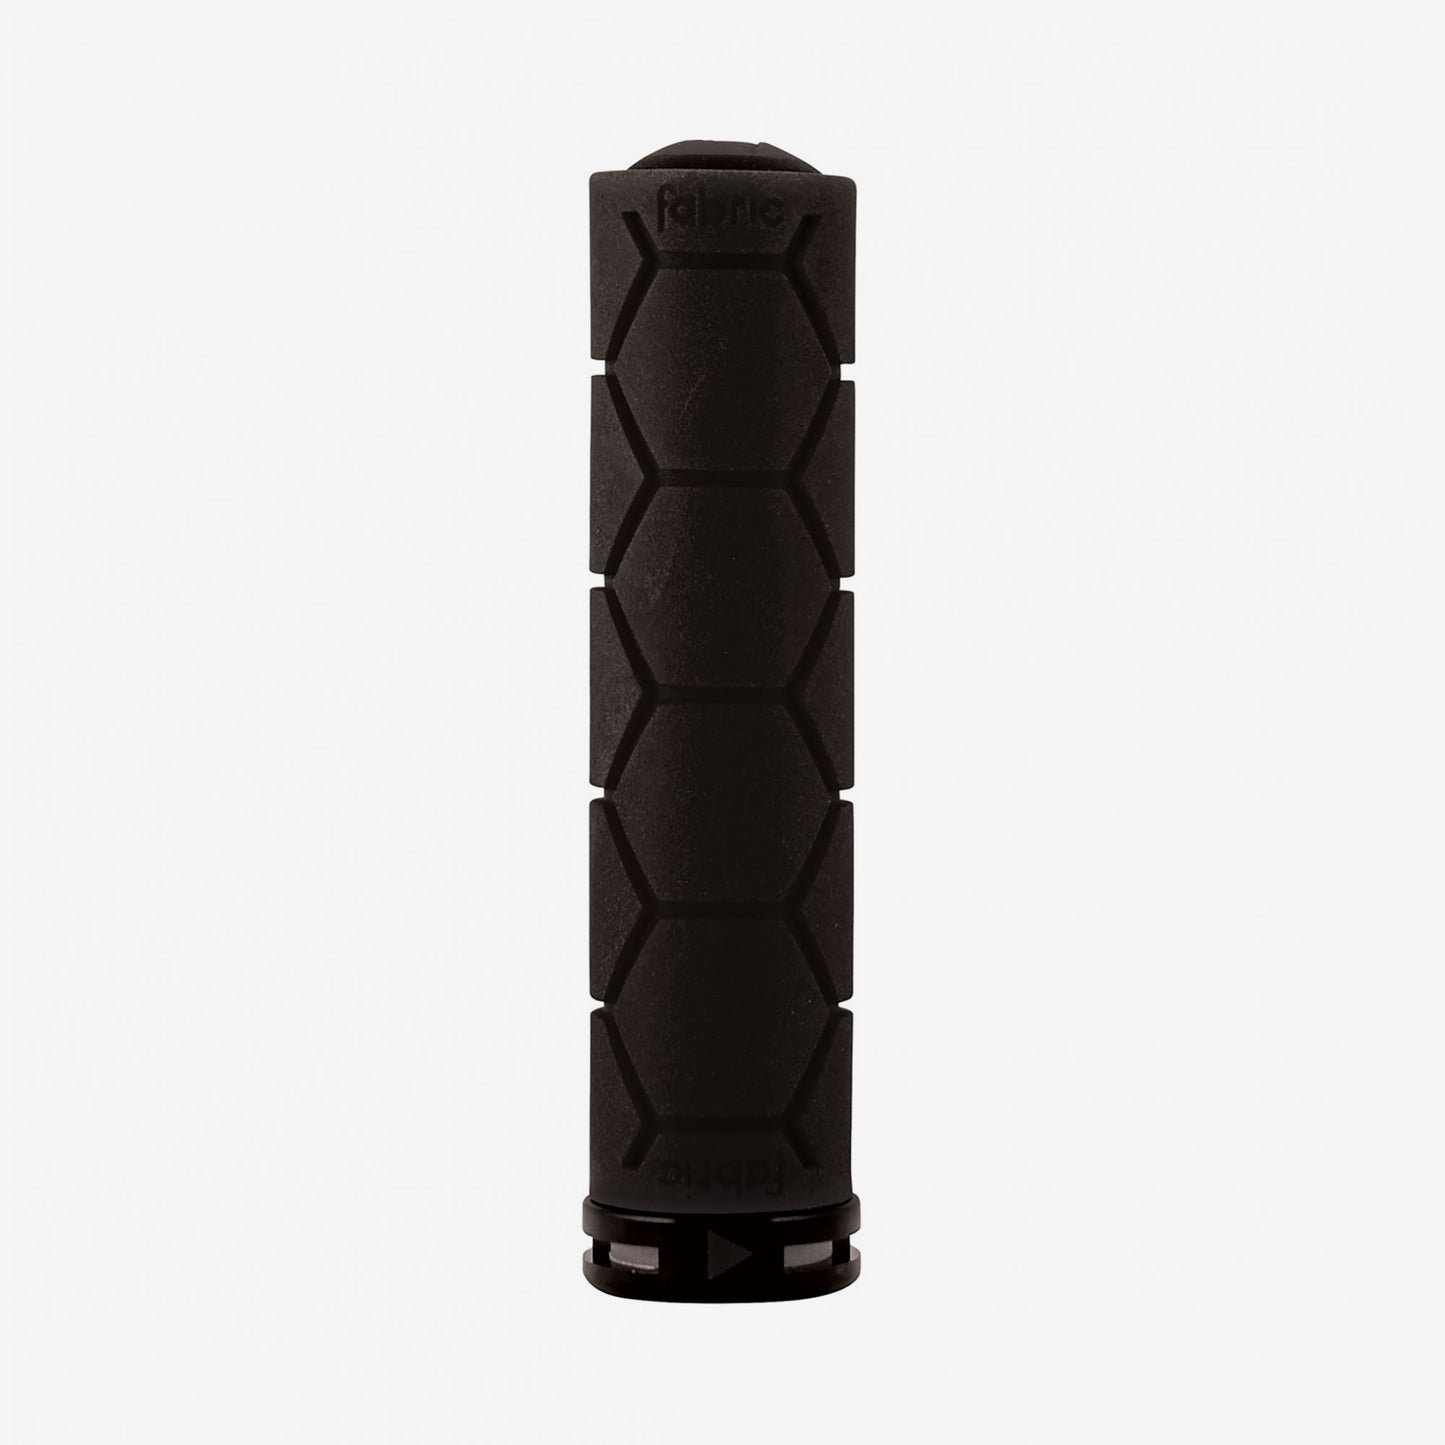 Fabric Silicon lock on grips